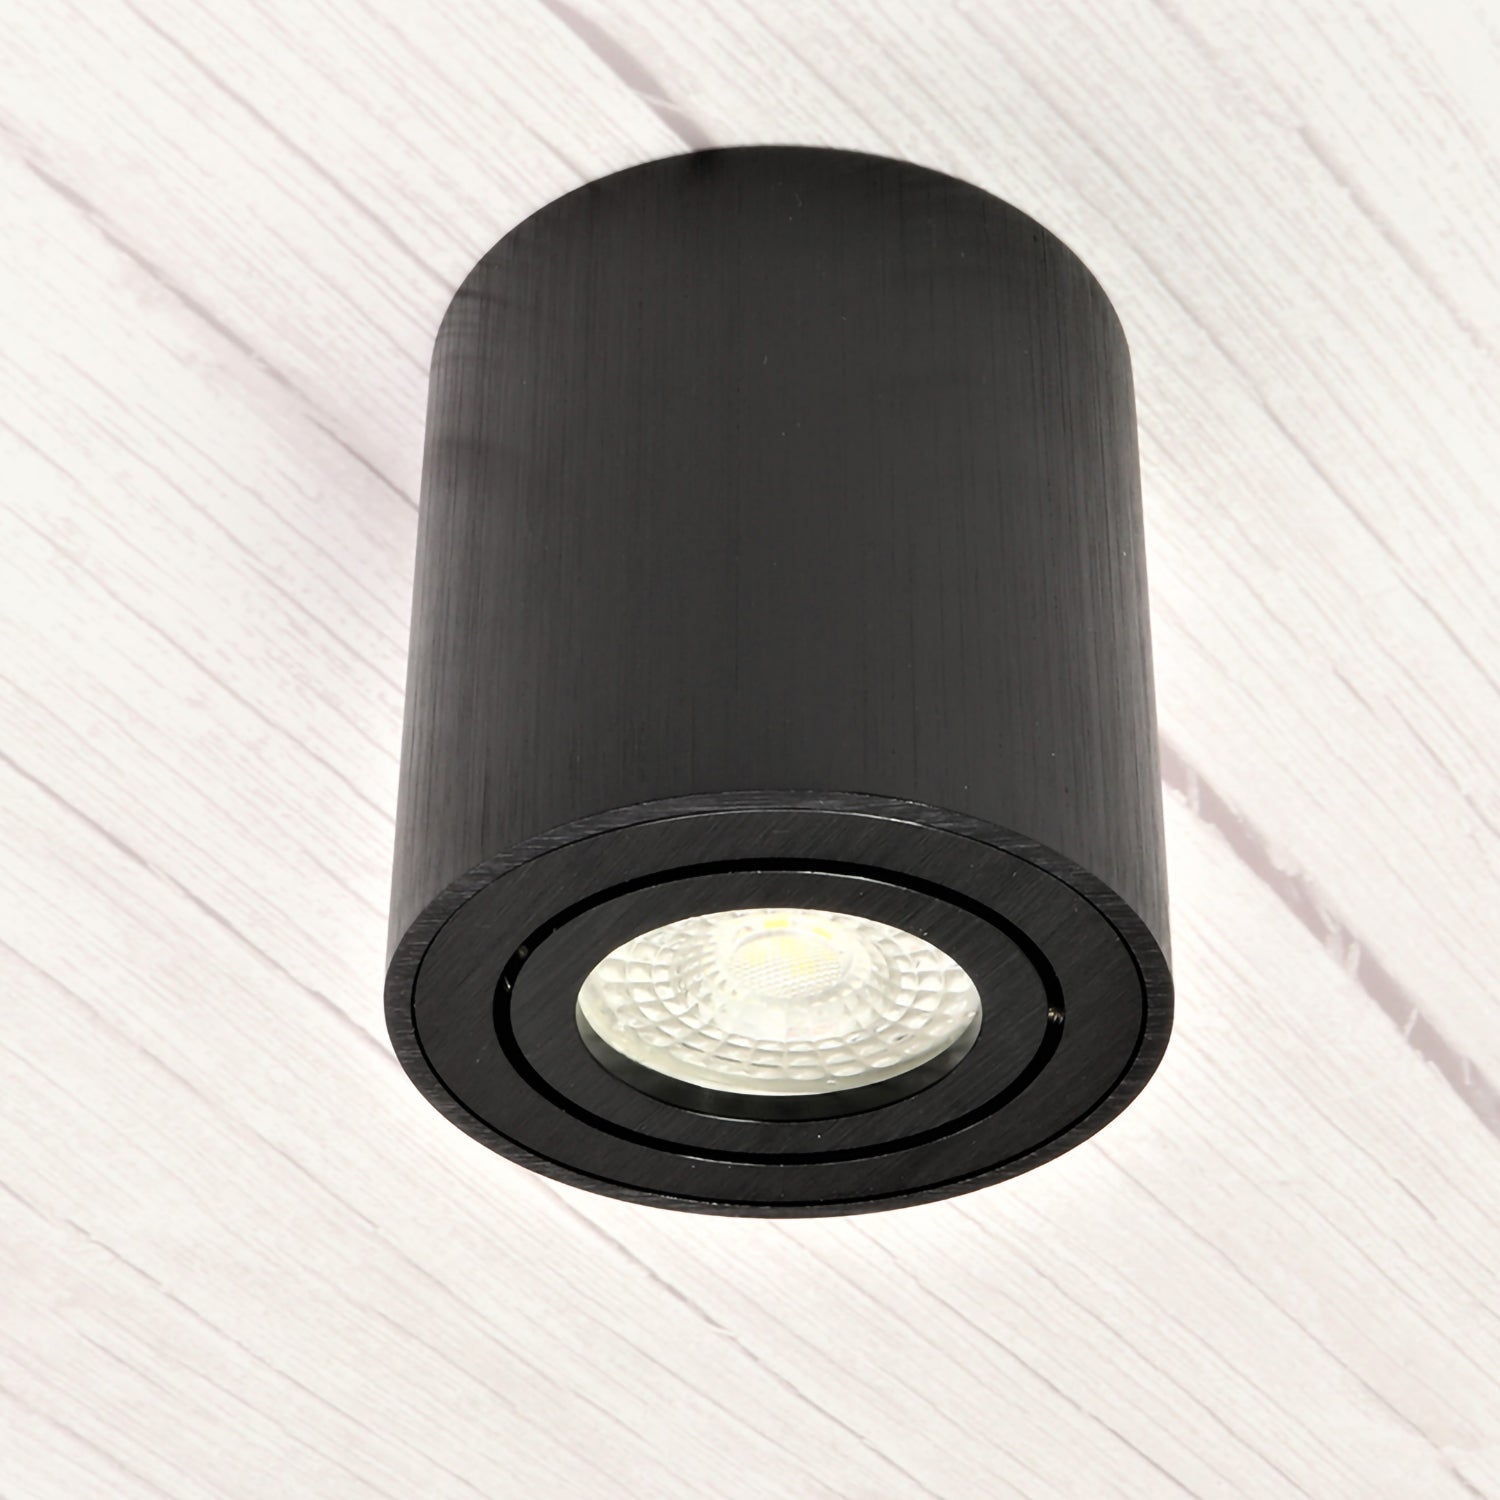 Dimmable light Black Surface-mounted novoom 6.2W Round LED spotlight light Milano GU10 – ceiling 230V surface-mounted